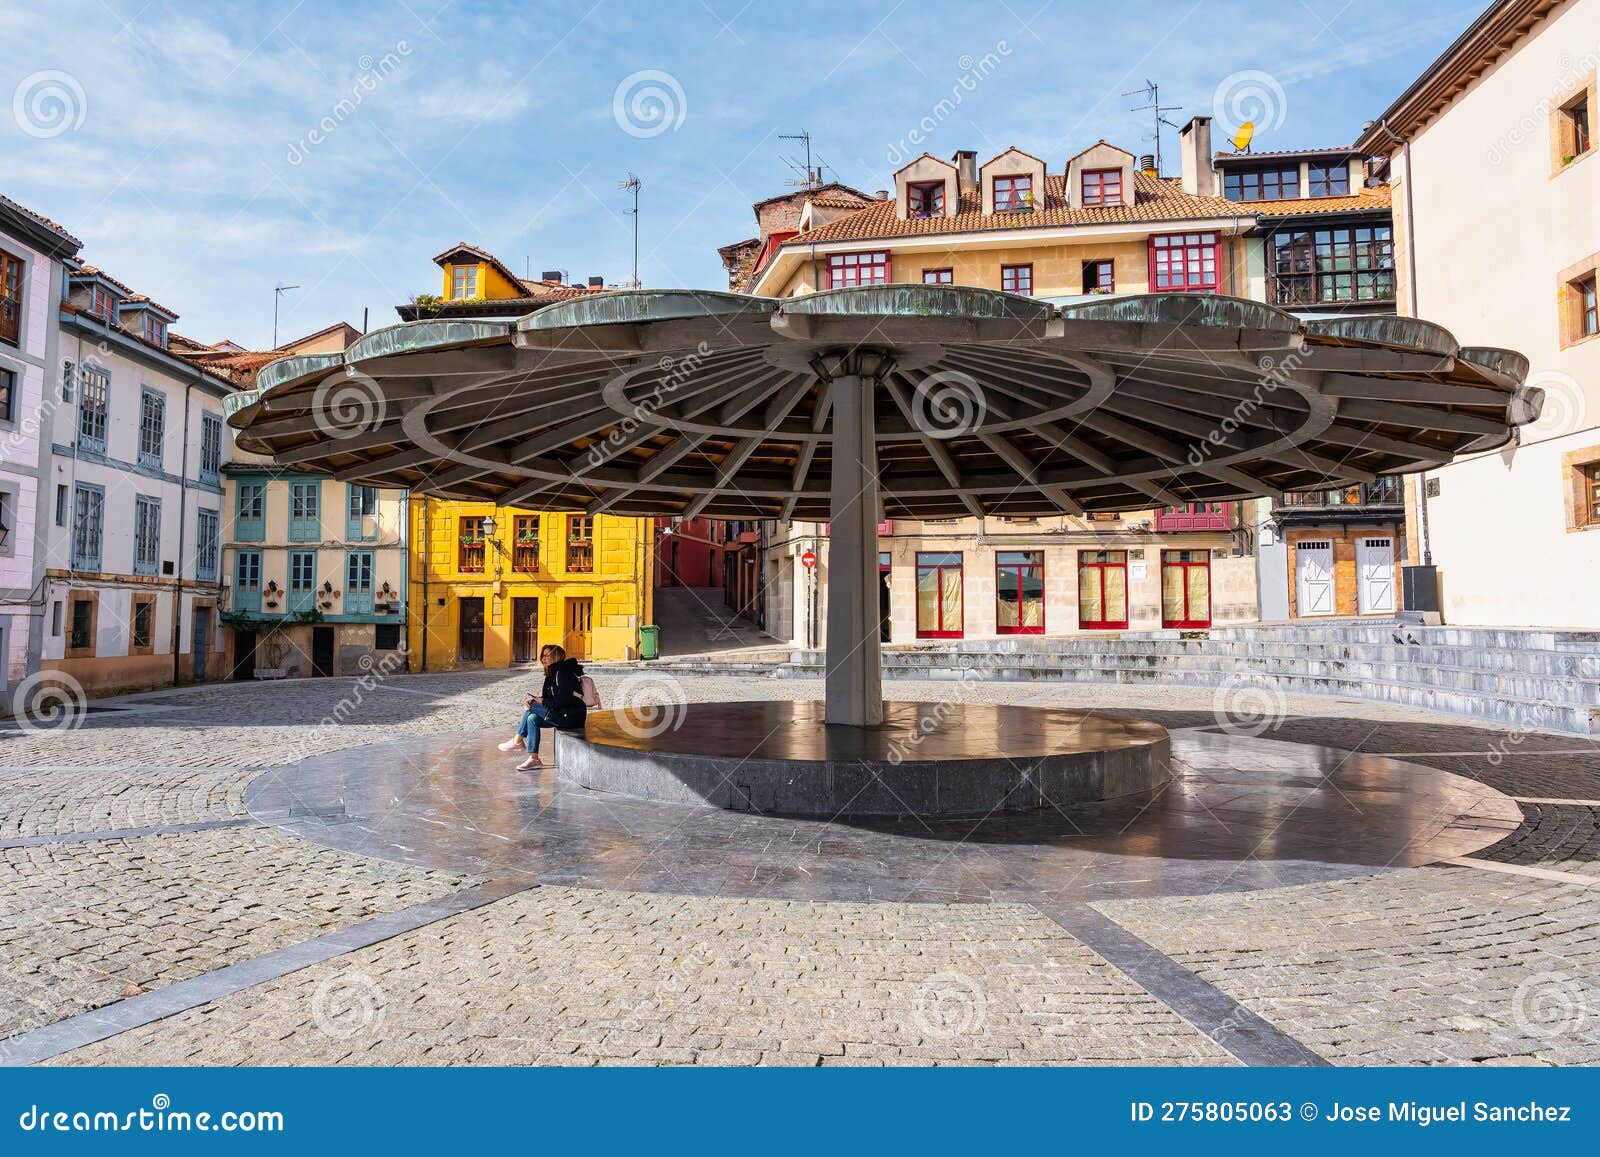 the umbrella square with picturesque buildings of striking colors in the surroundings of the square, oviedo, asturias.